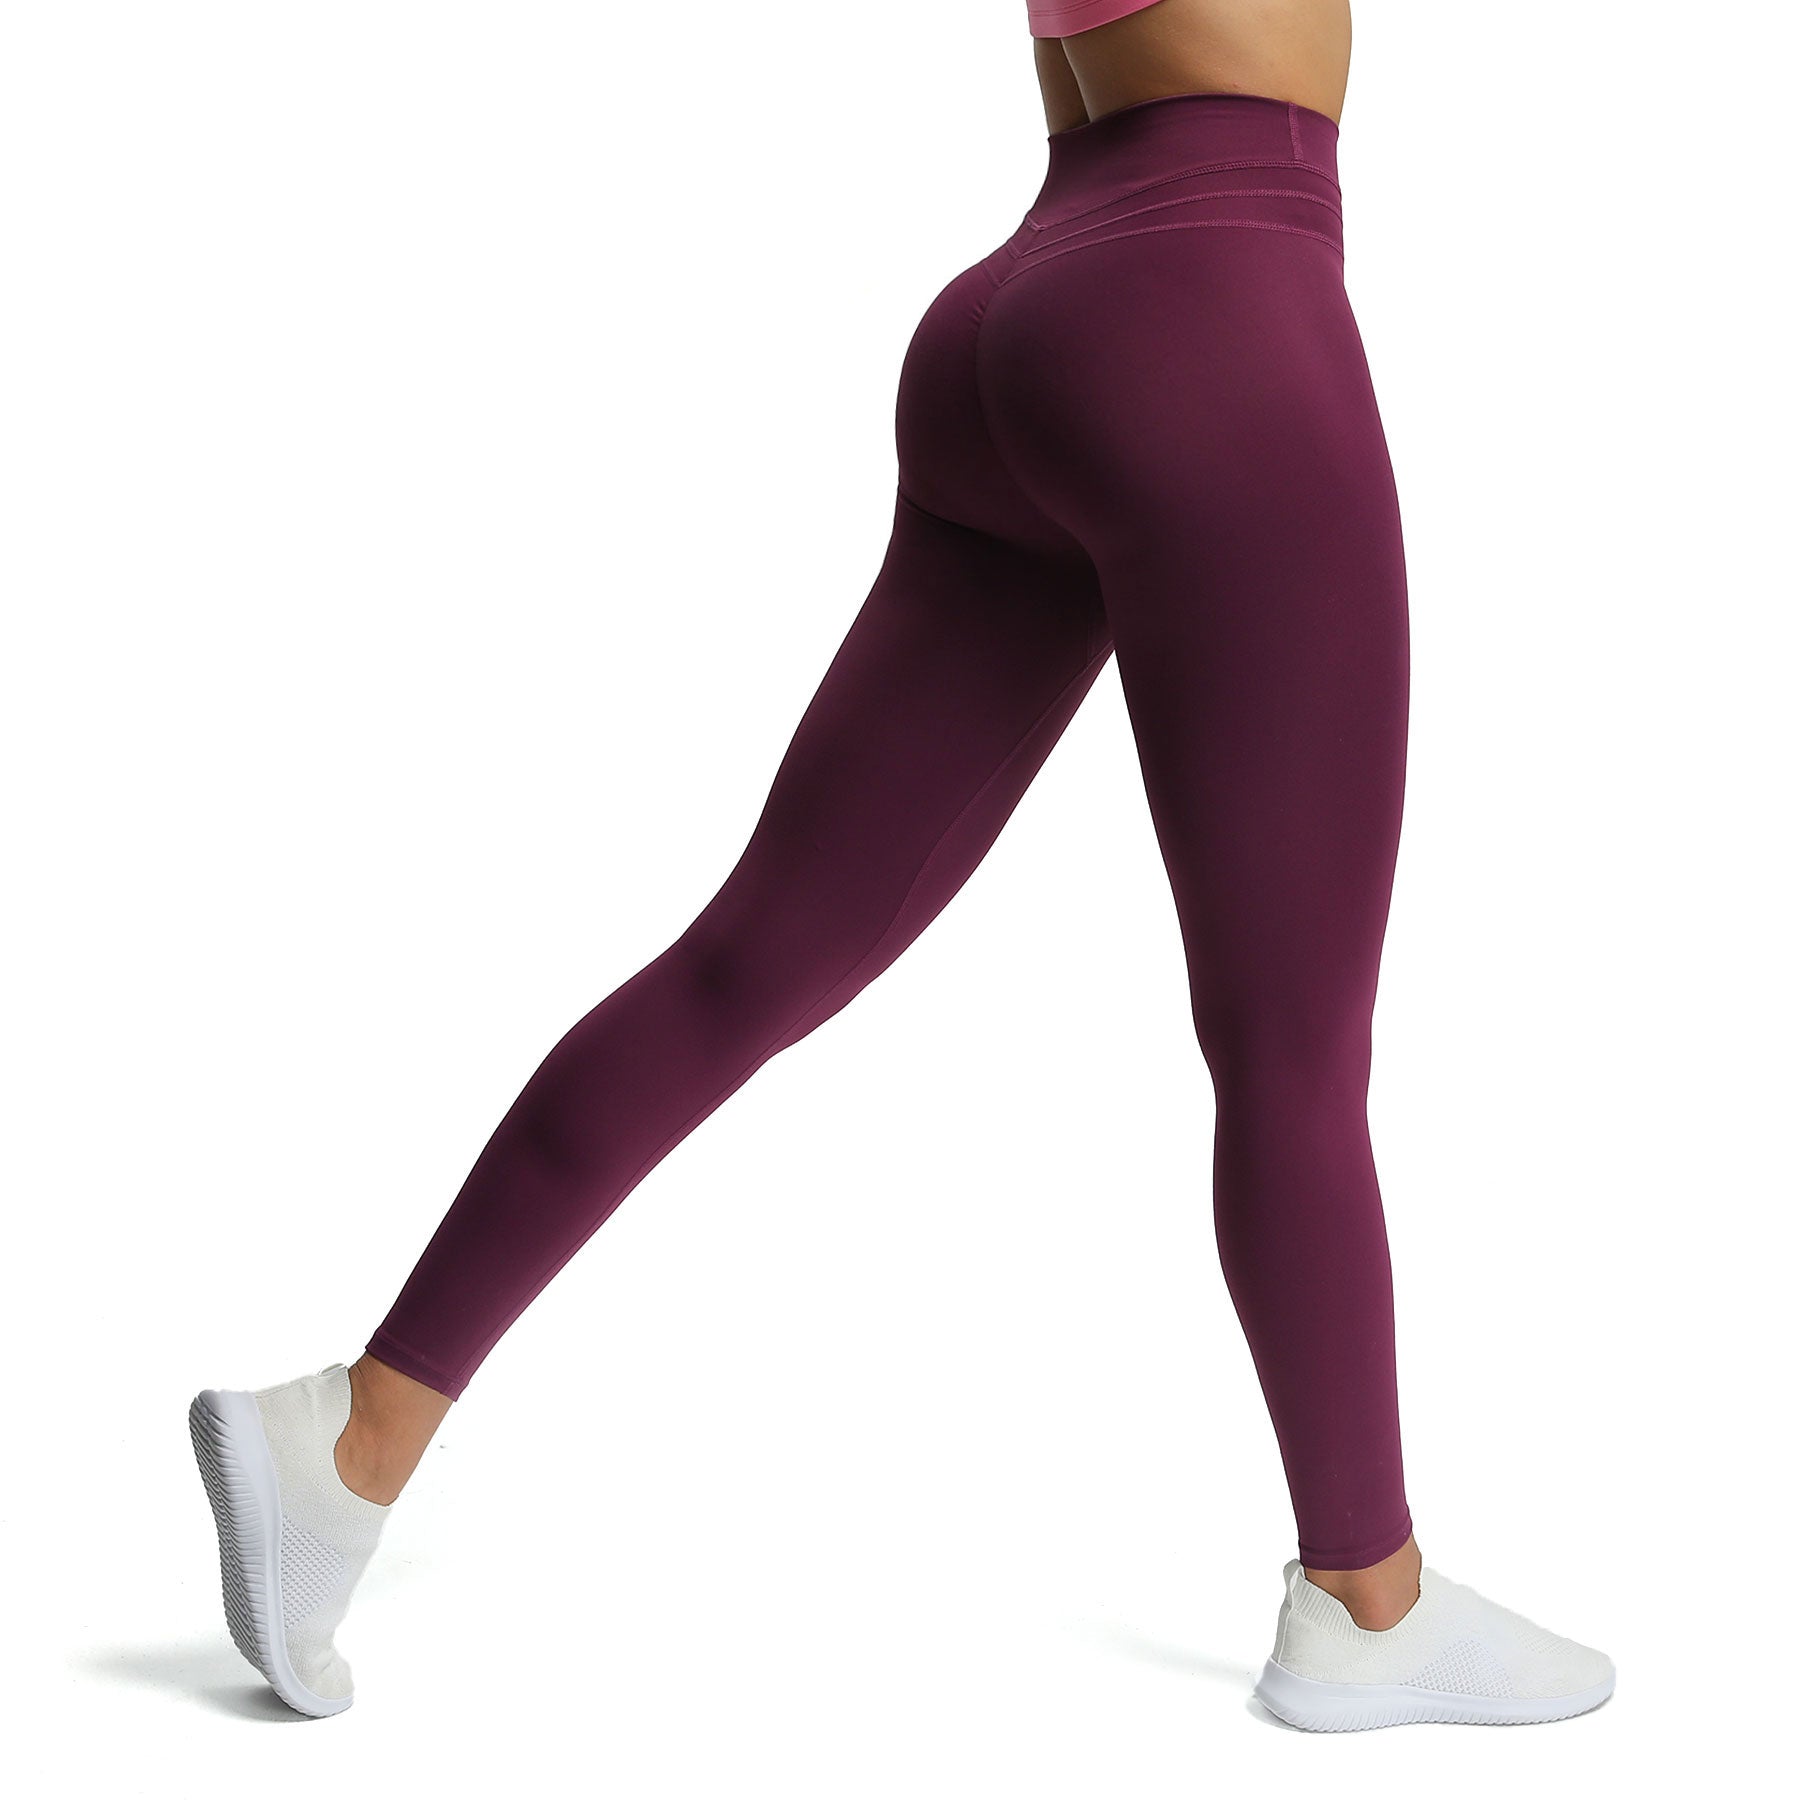  Aoxjox High Waisted Workout Leggings For Women Scrunch Tummy  Control Luna Buttery Soft Yoga Pants 27